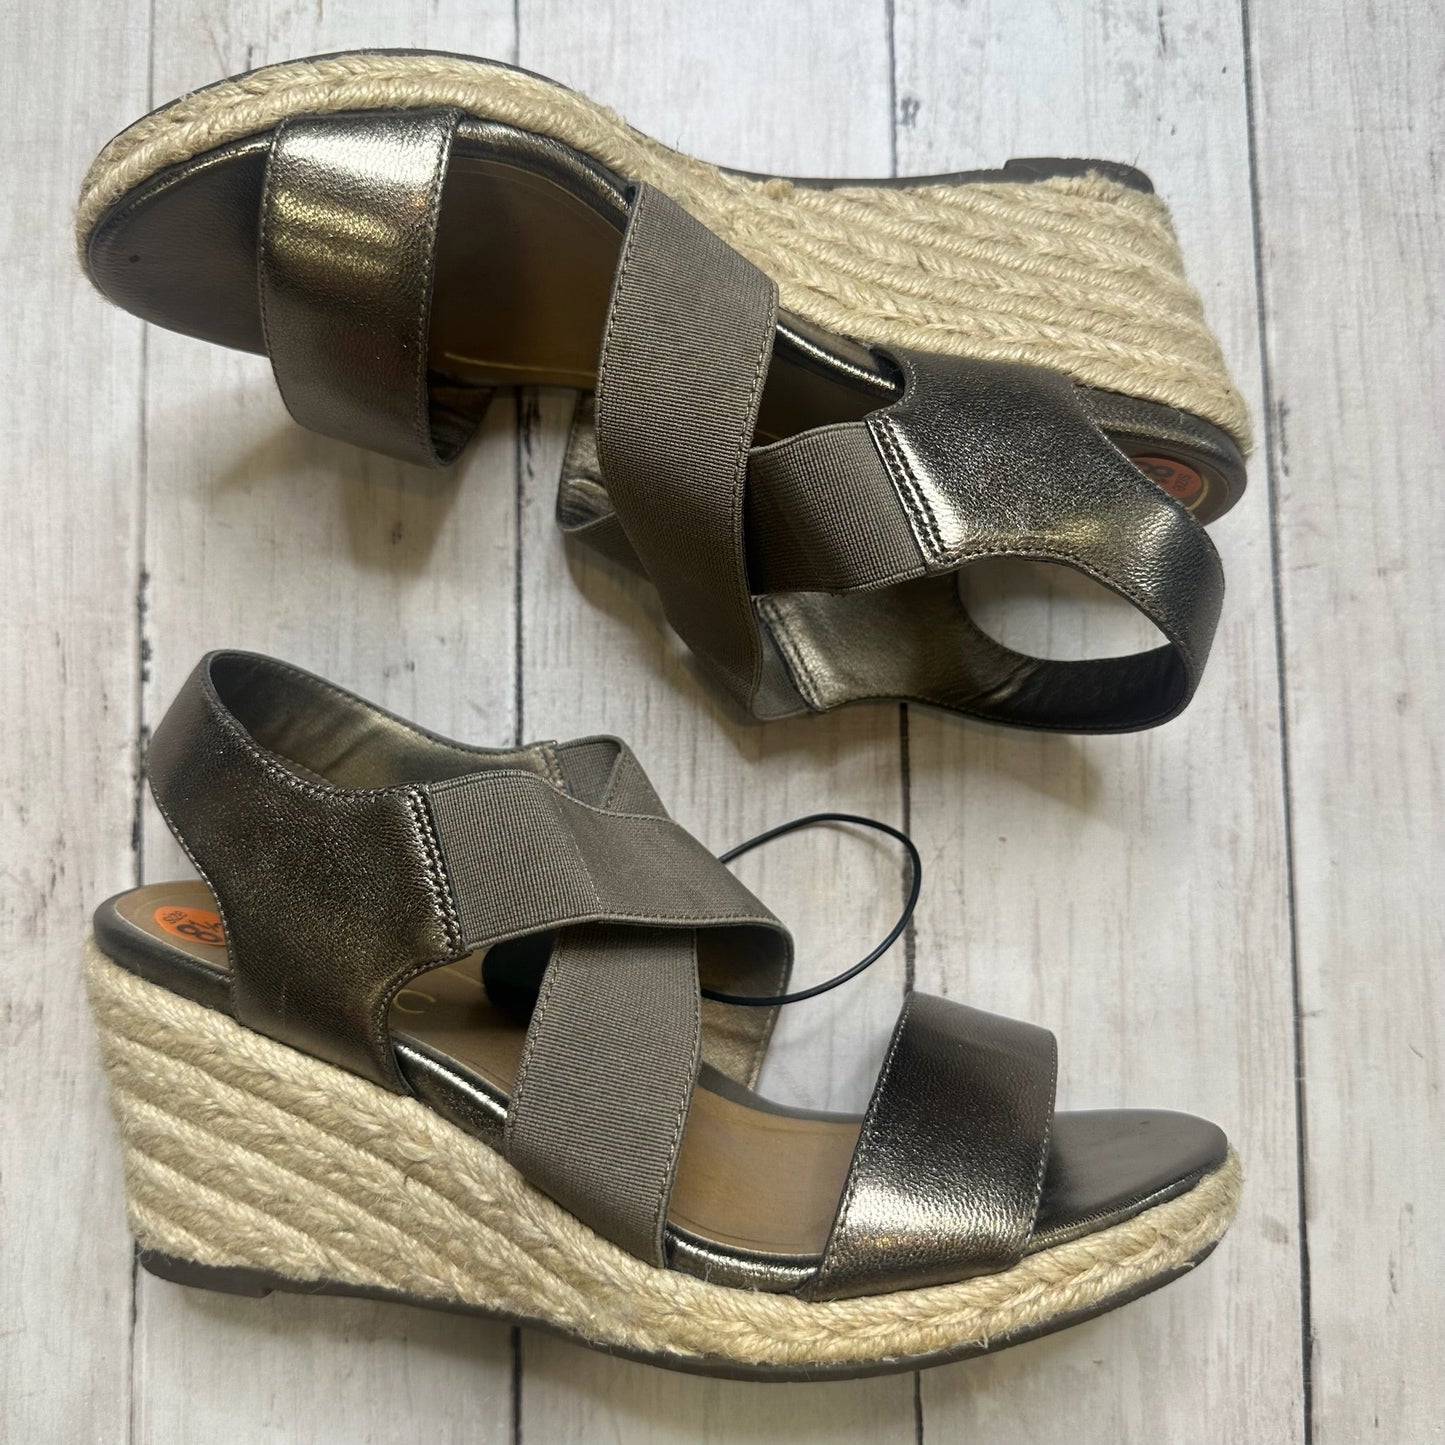 Sandals Heels Wedge By Vionic  Size: 6.5